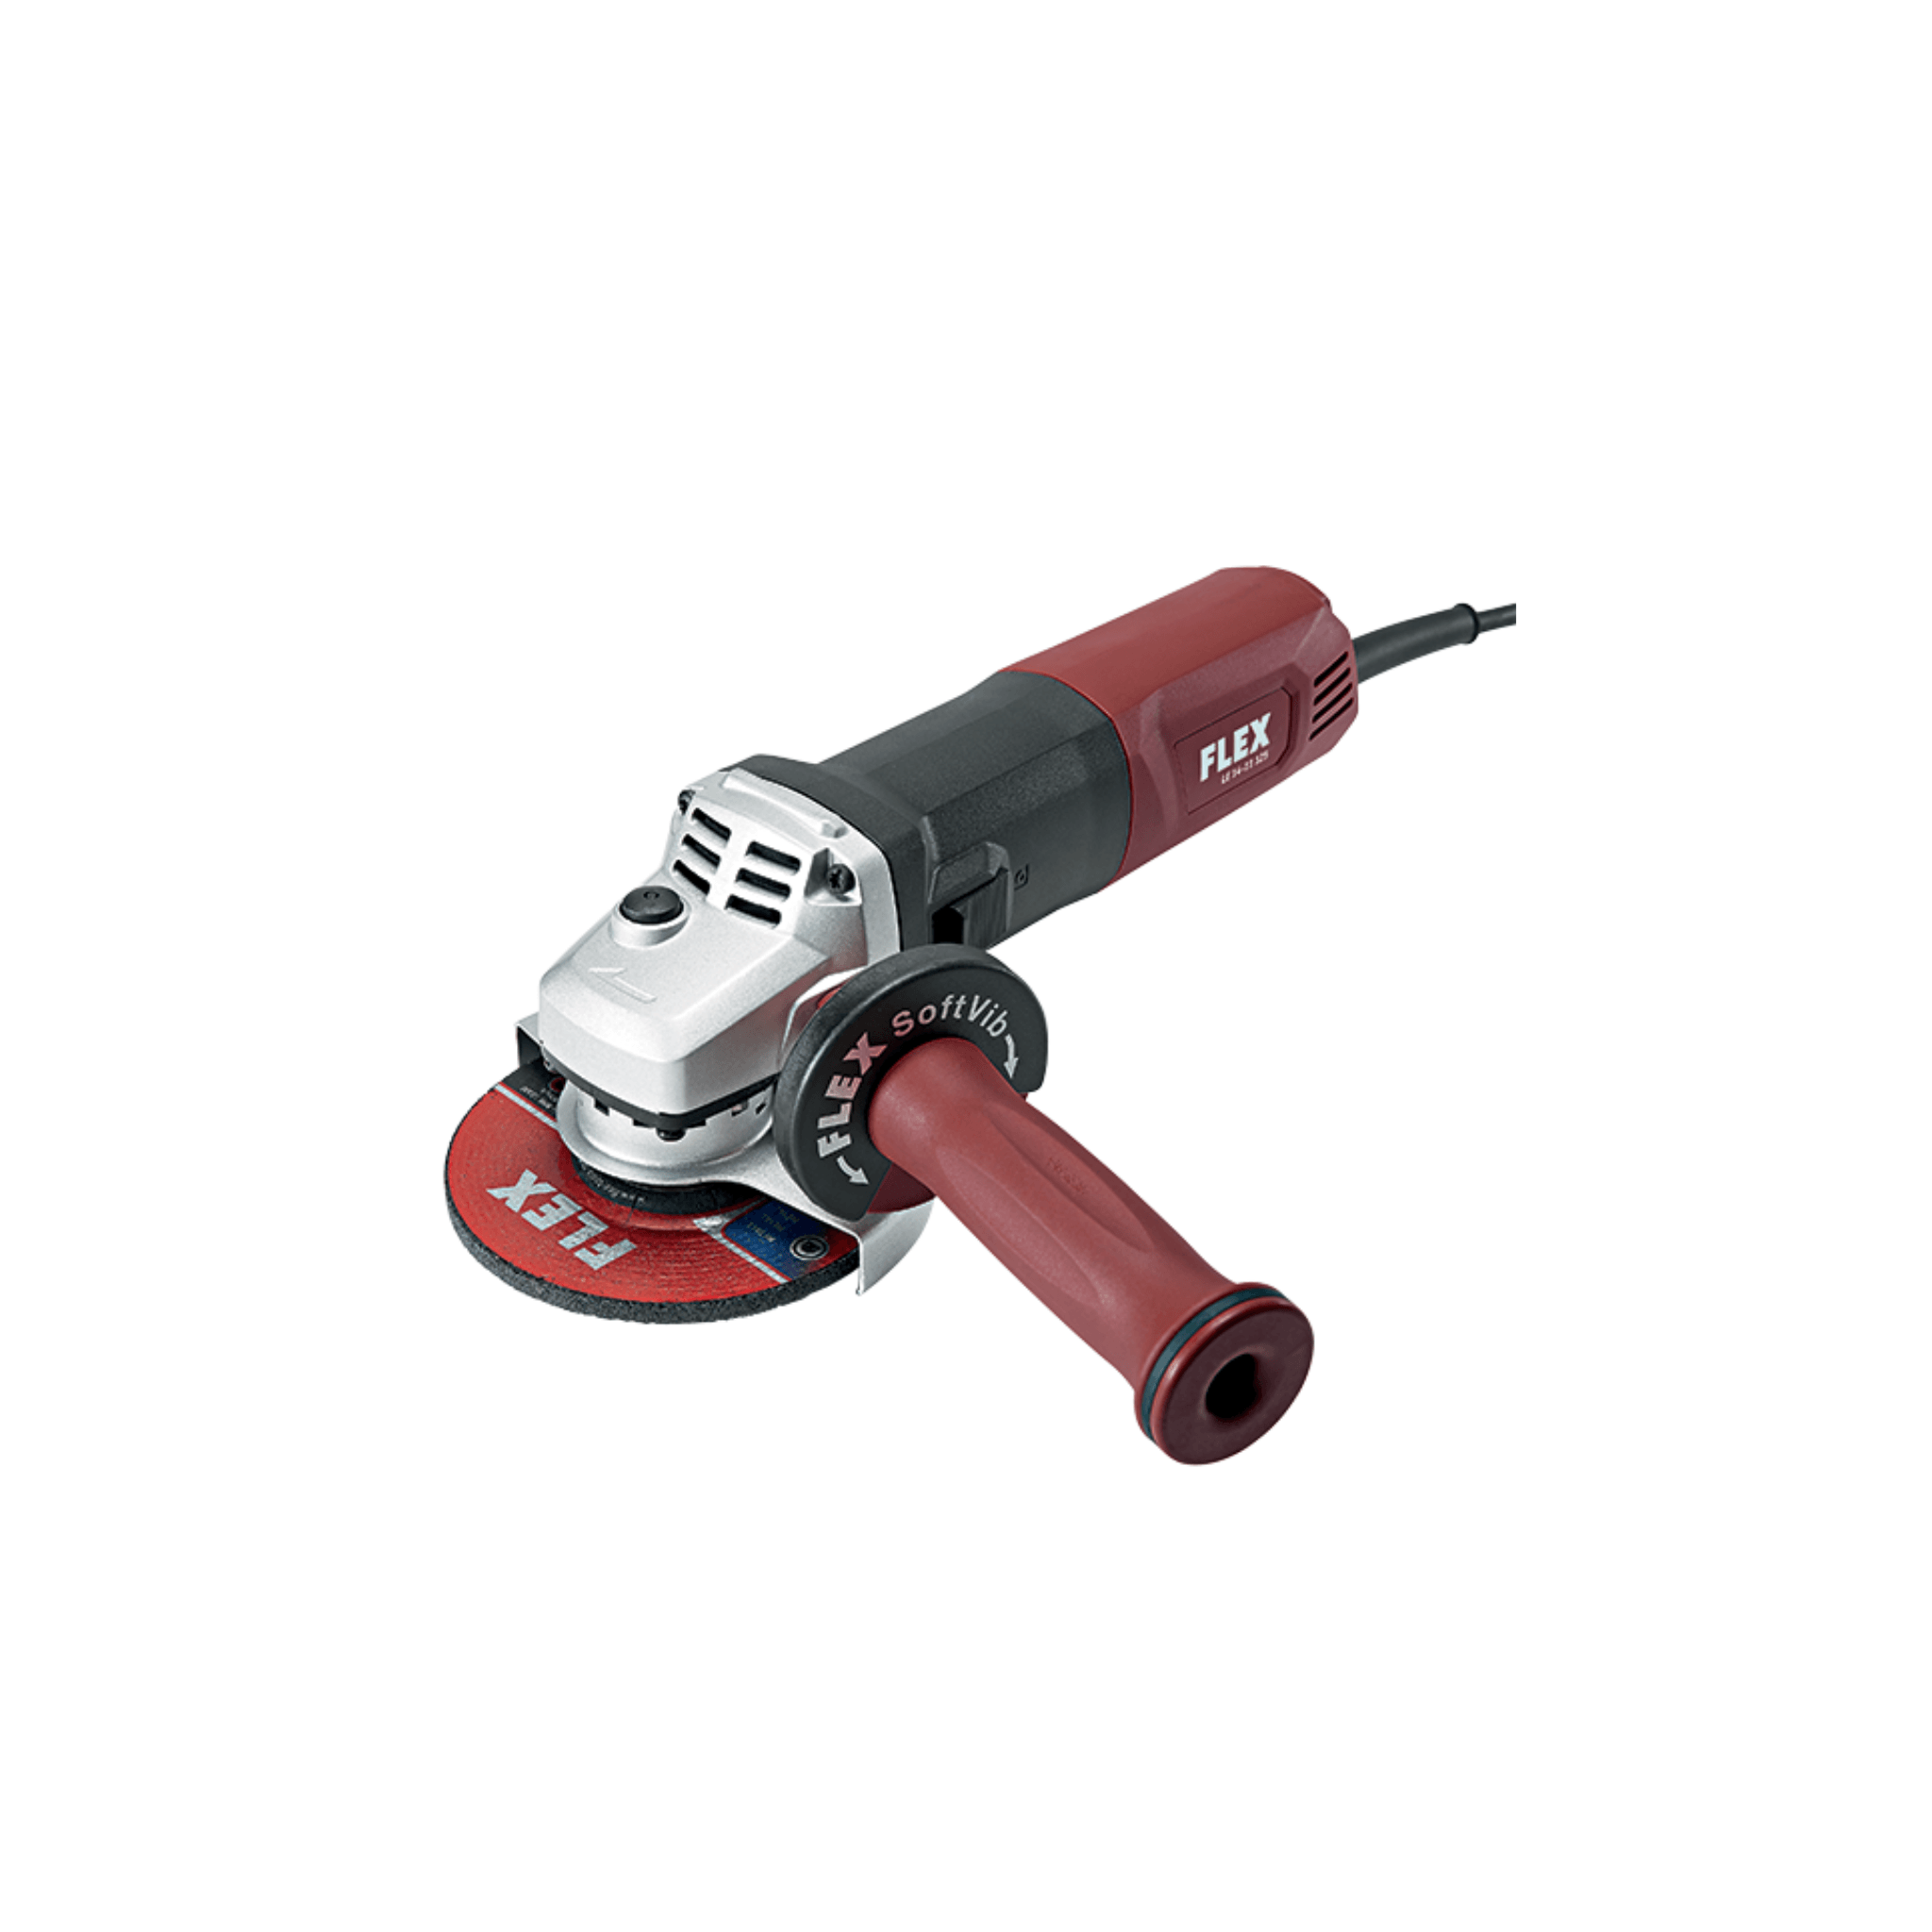 FLEX 12 Amp 4-1/2" / 5" Variable Speed Small Angle Grinder With Restart Protection And Side Switch - Direct Stone Tool Supply, Inc